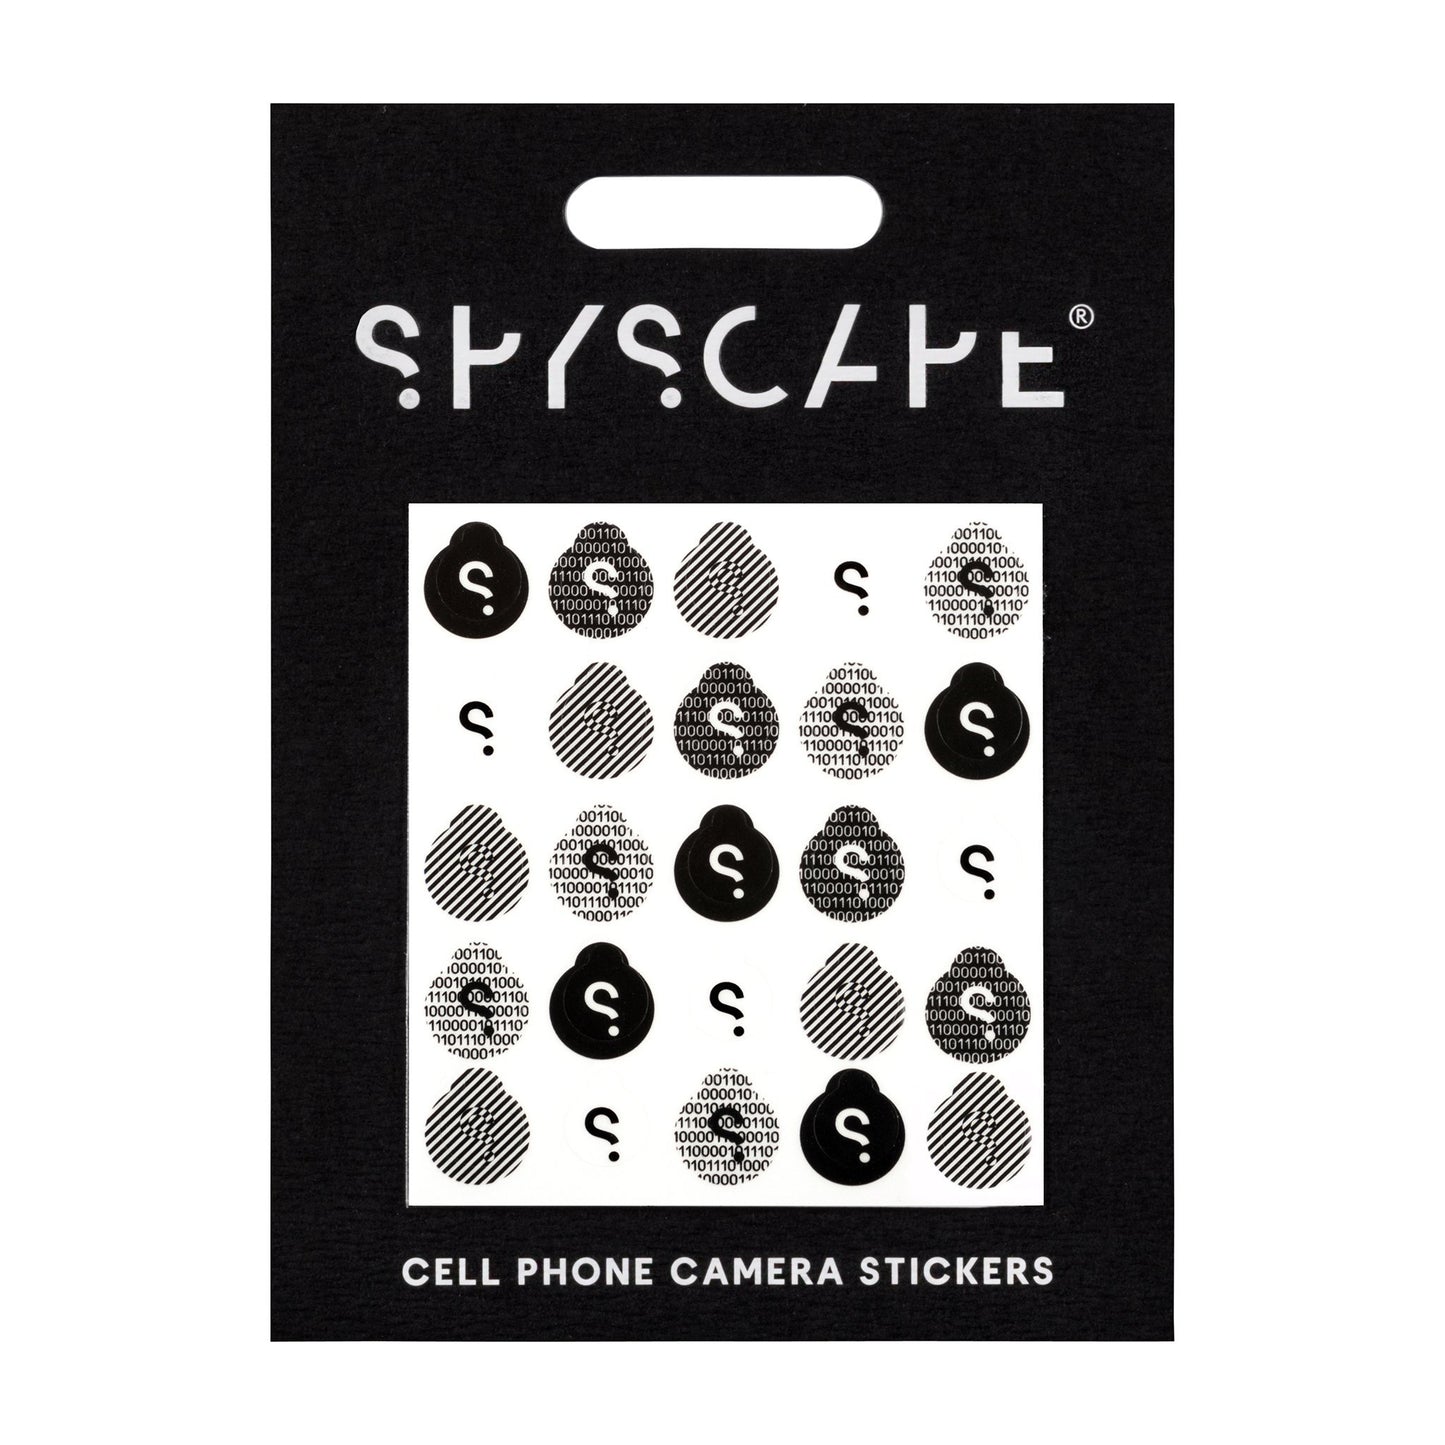 SPYSCAPE Cell Phone Camera Stickers - 